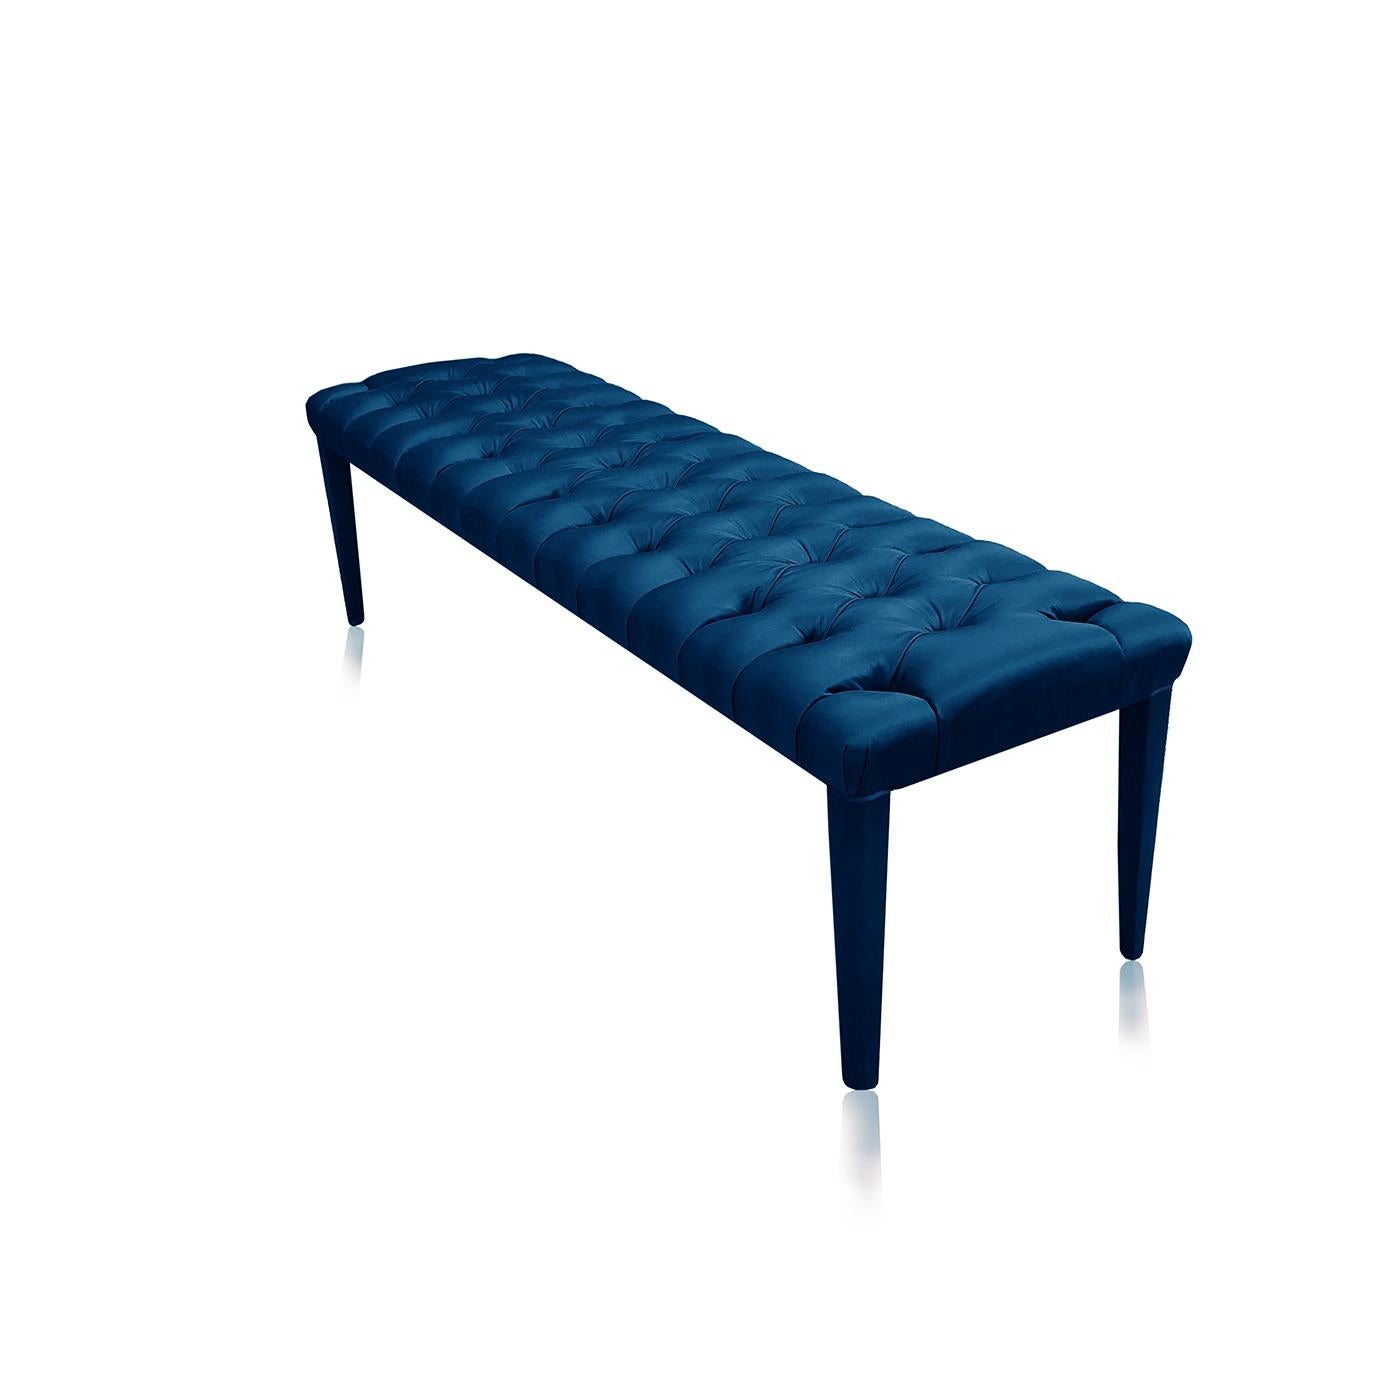 The Farfalla Ottoman Bench in Navy by Davide Barzaghi is firm, comfortable and exquisitely elegant. Fit for royalty, this ottoman bench features plush padding on top of a solid dried beech wood frame. Upholstered in a luxurious cotton satin, it is